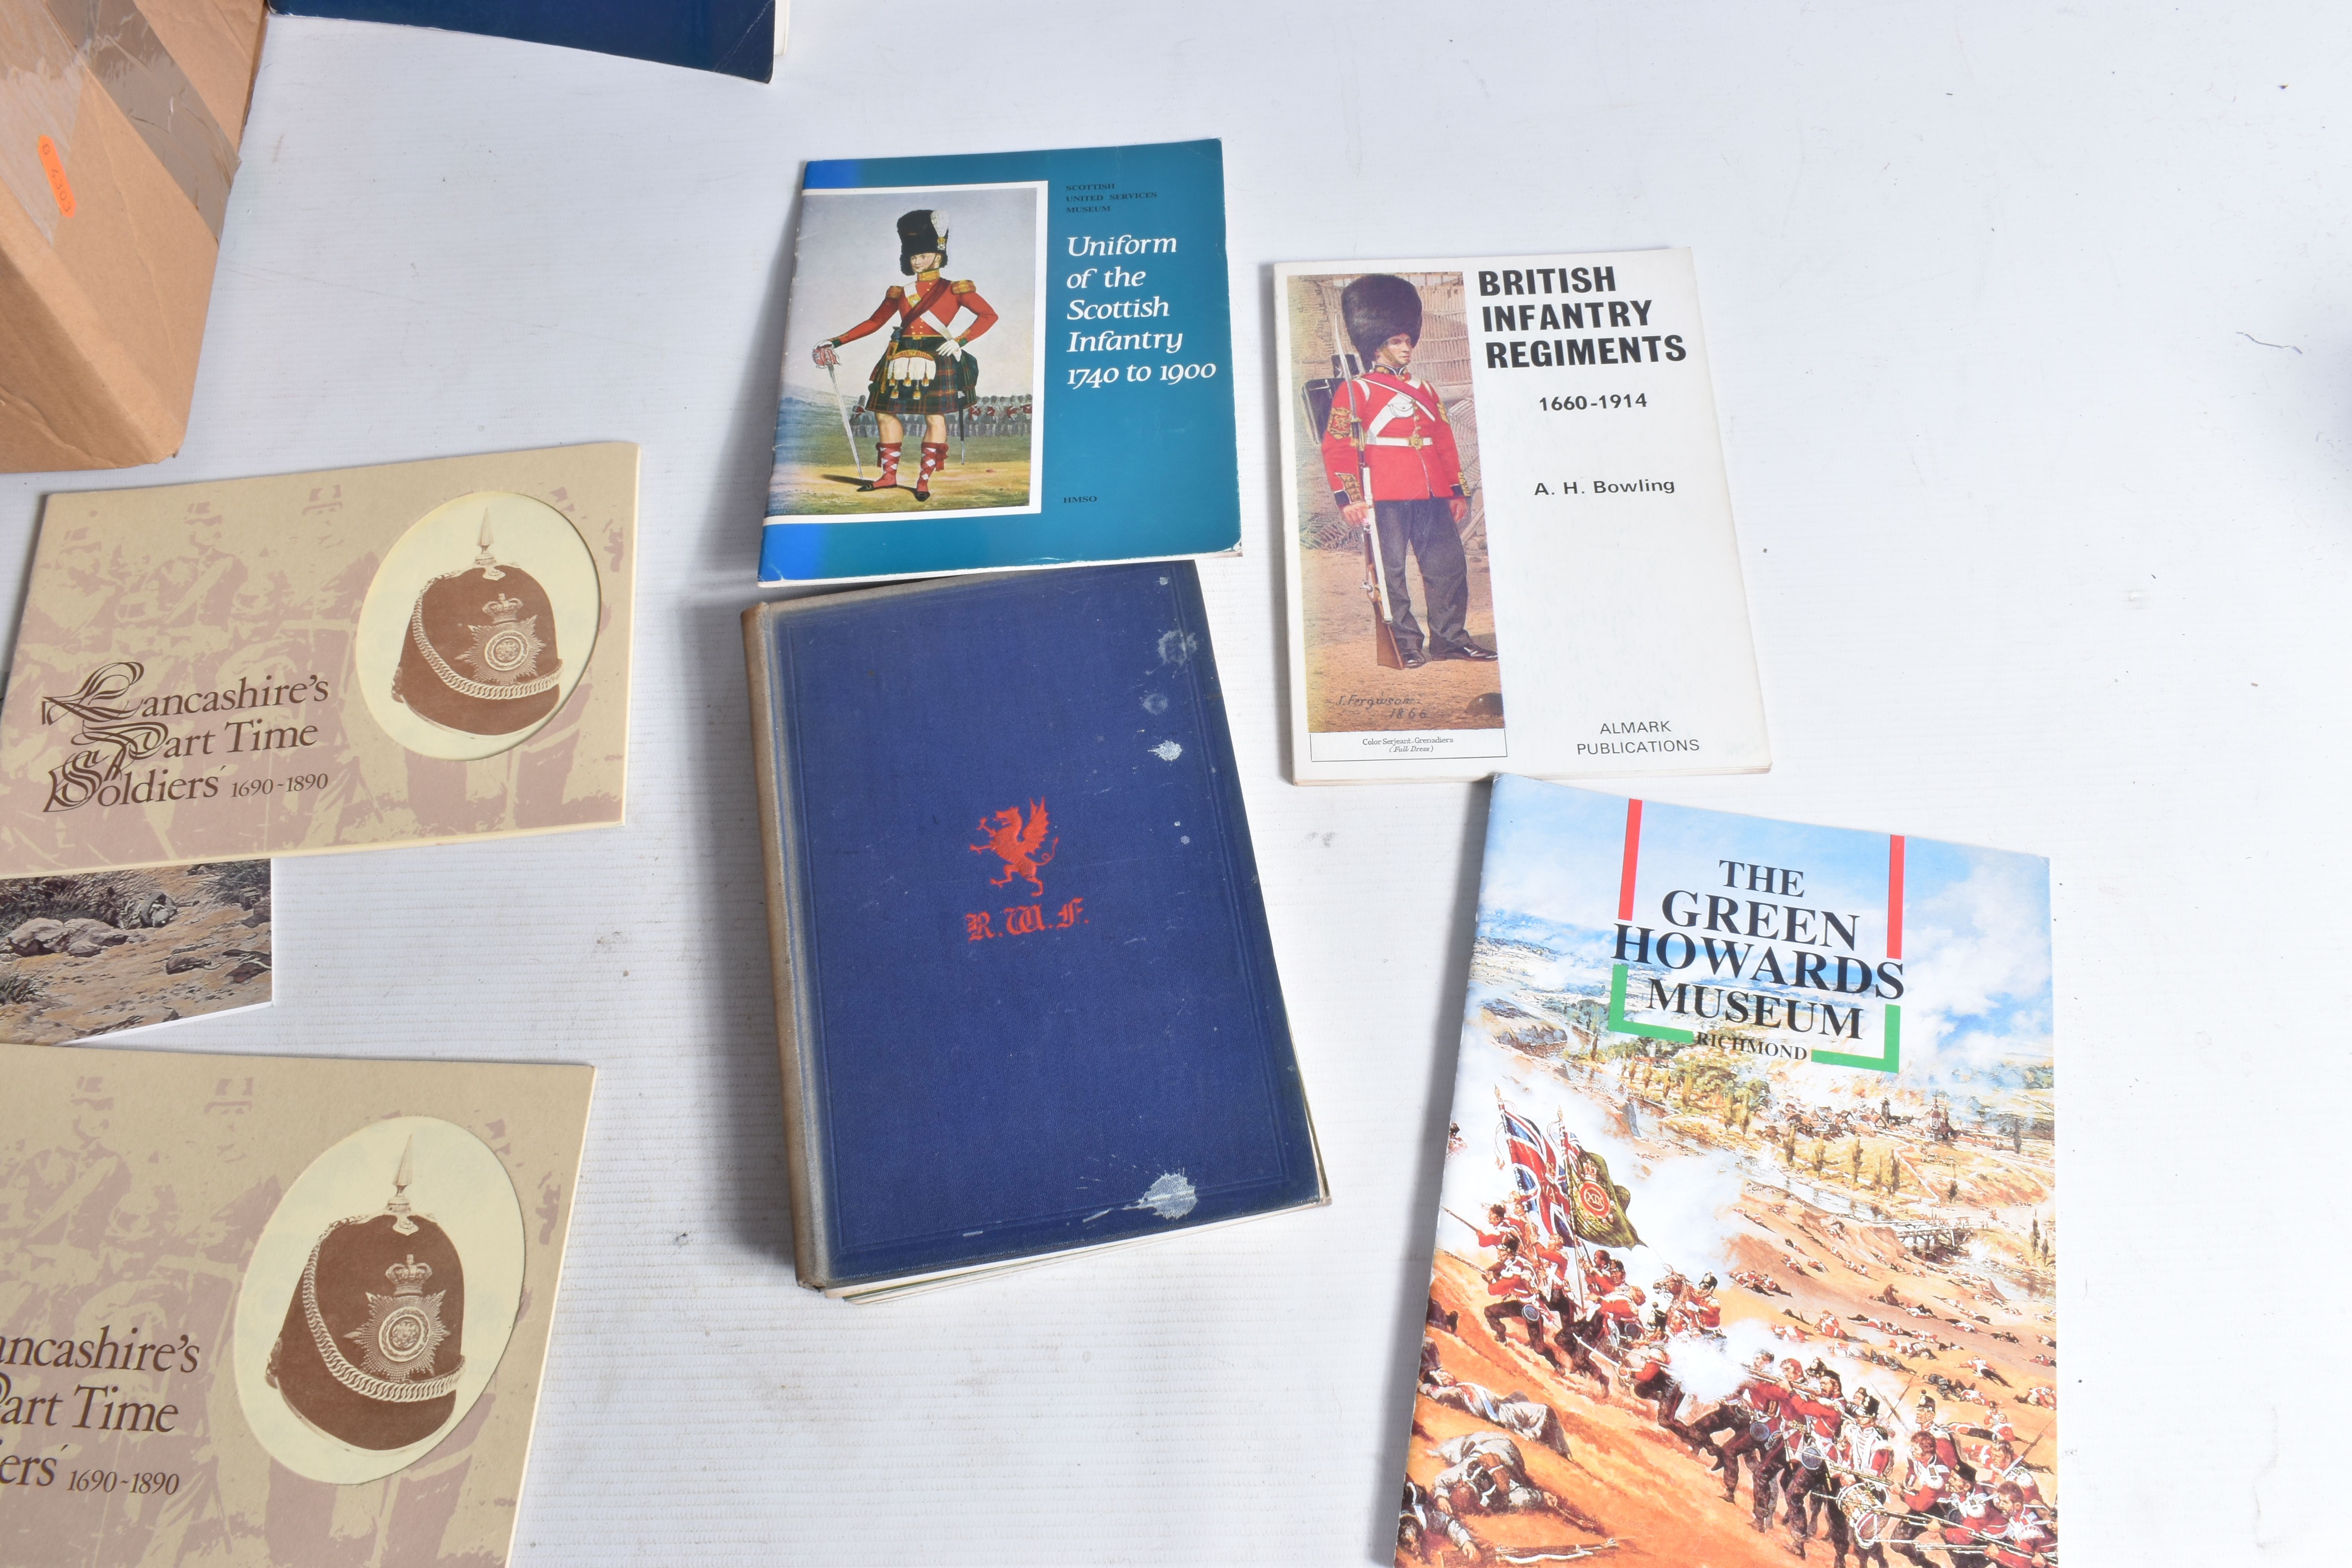 A SELECTION OF SOFT BACK BOOKS AND MAGAZINES, many editions from the 1960's onwards about the - Image 6 of 8